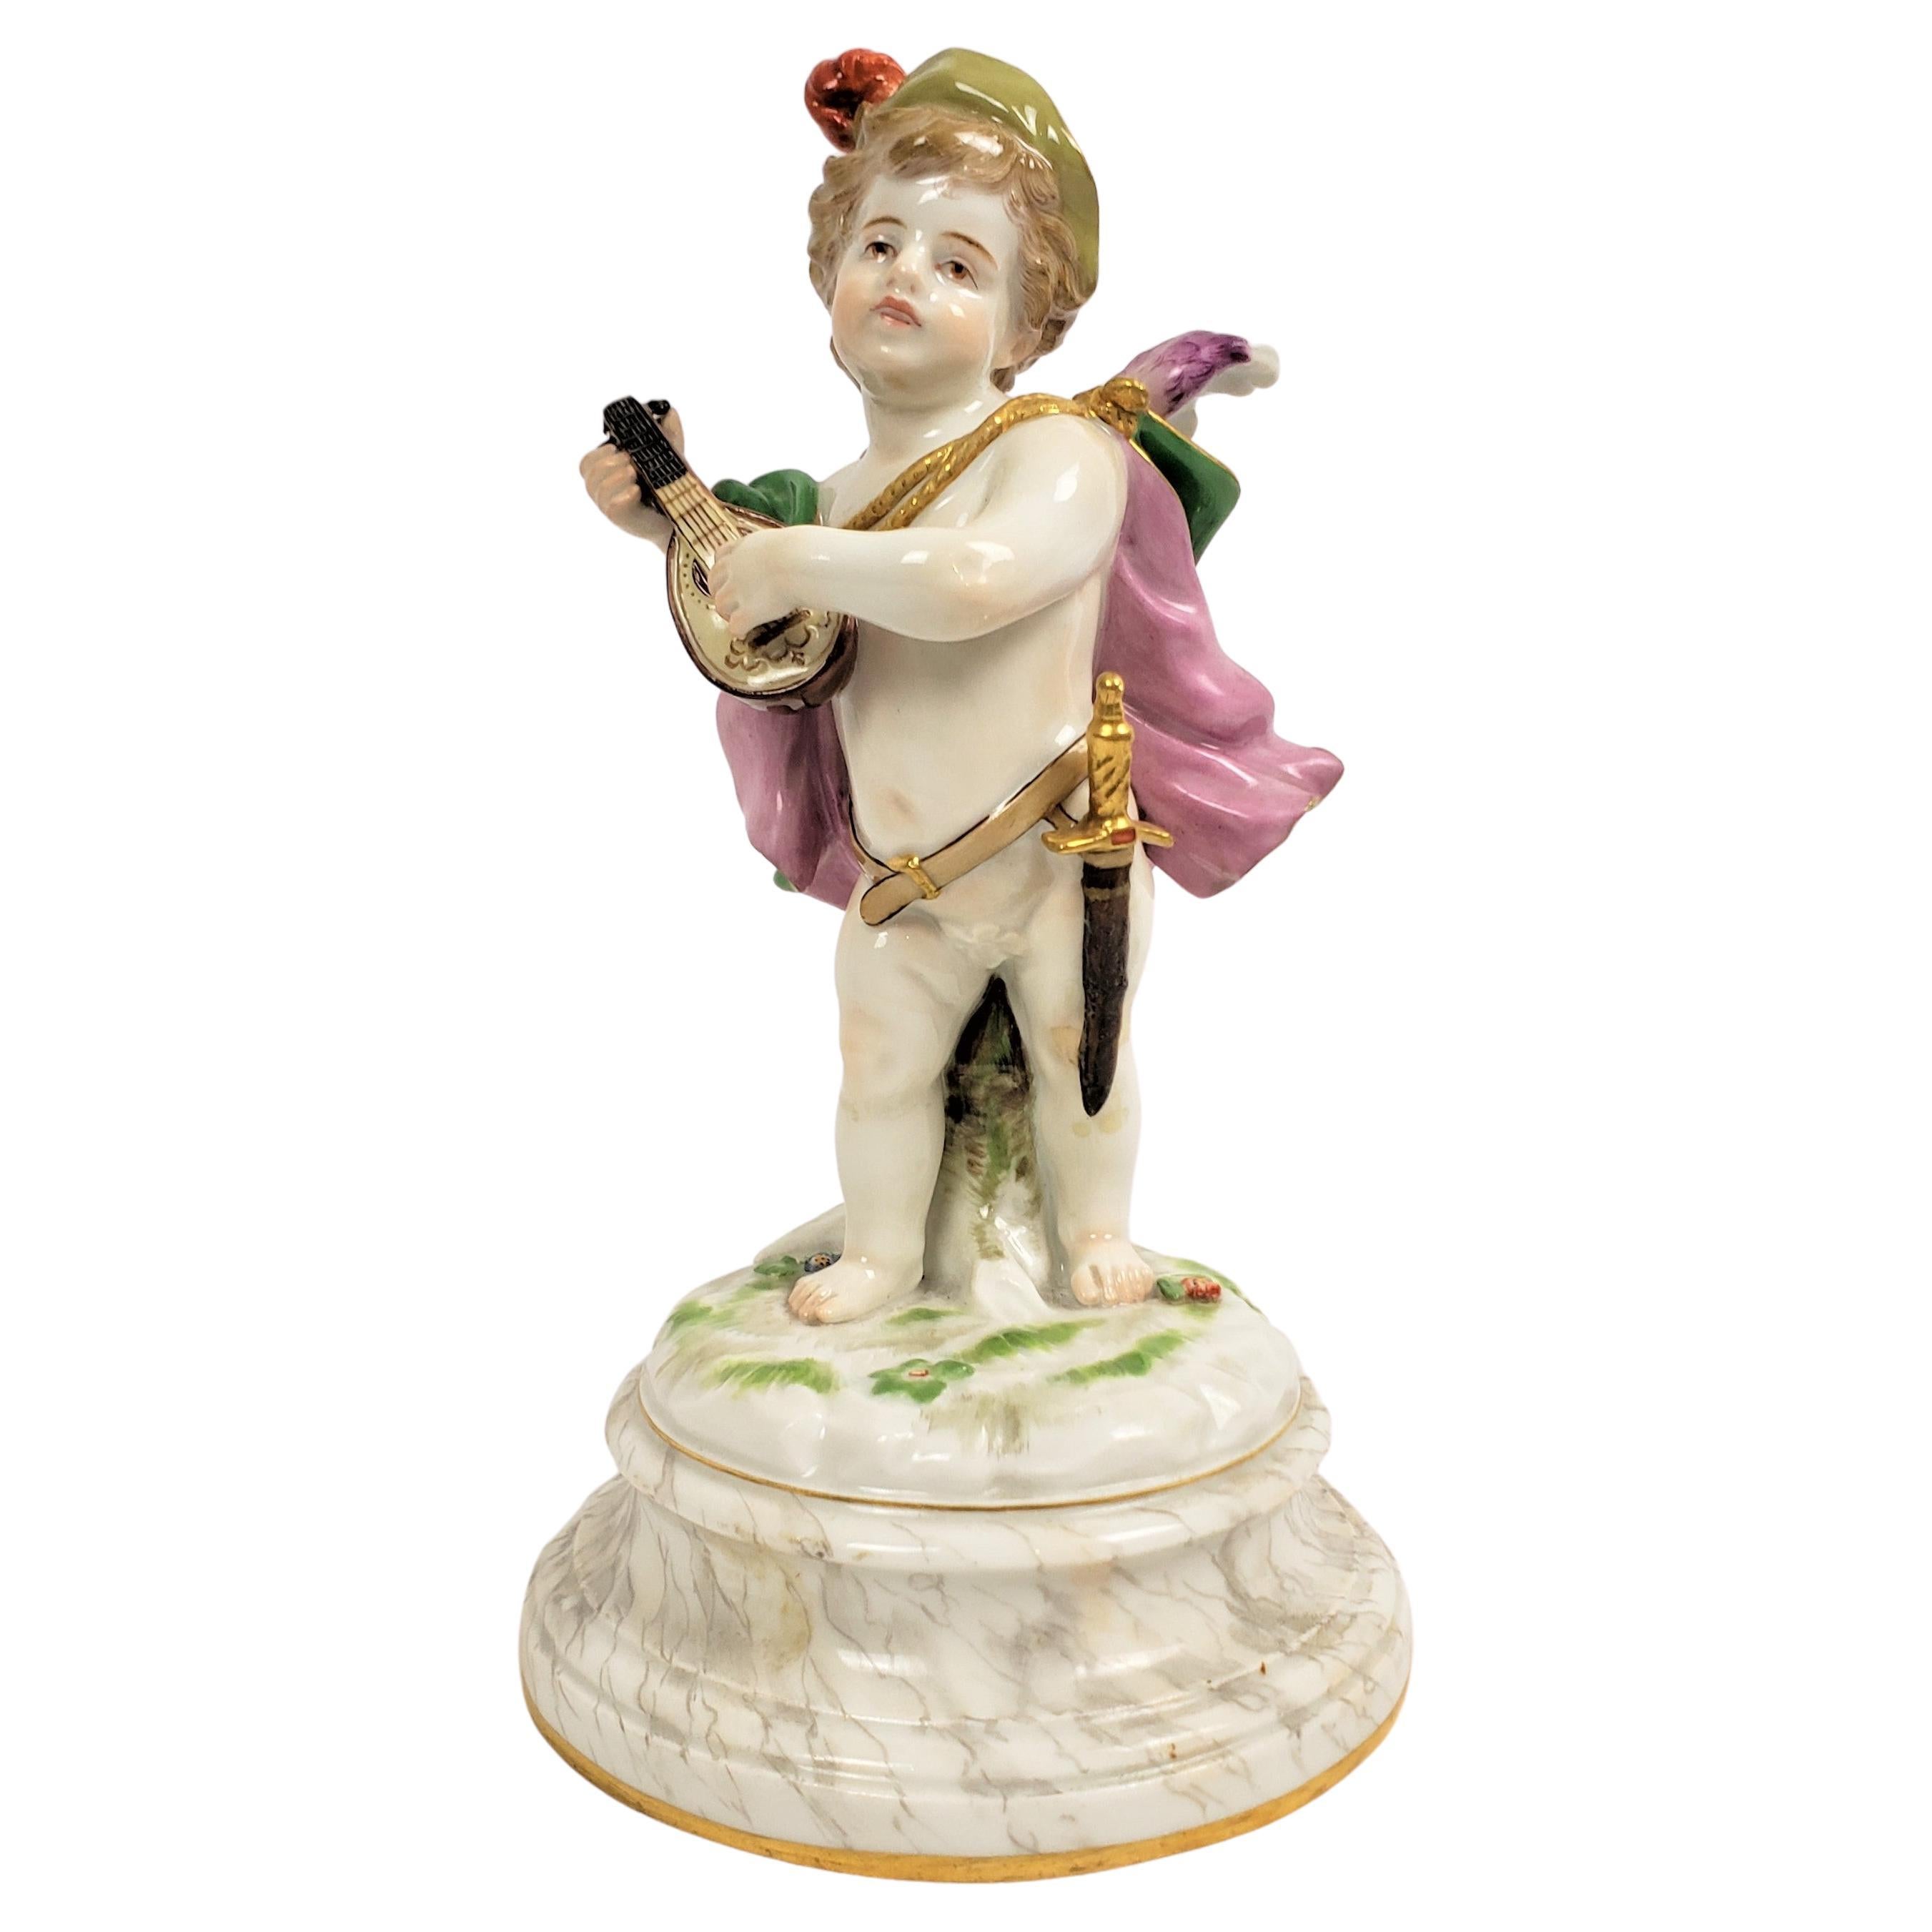 Antique Meissen Porcelain Figurine of a Child Playing a Lute